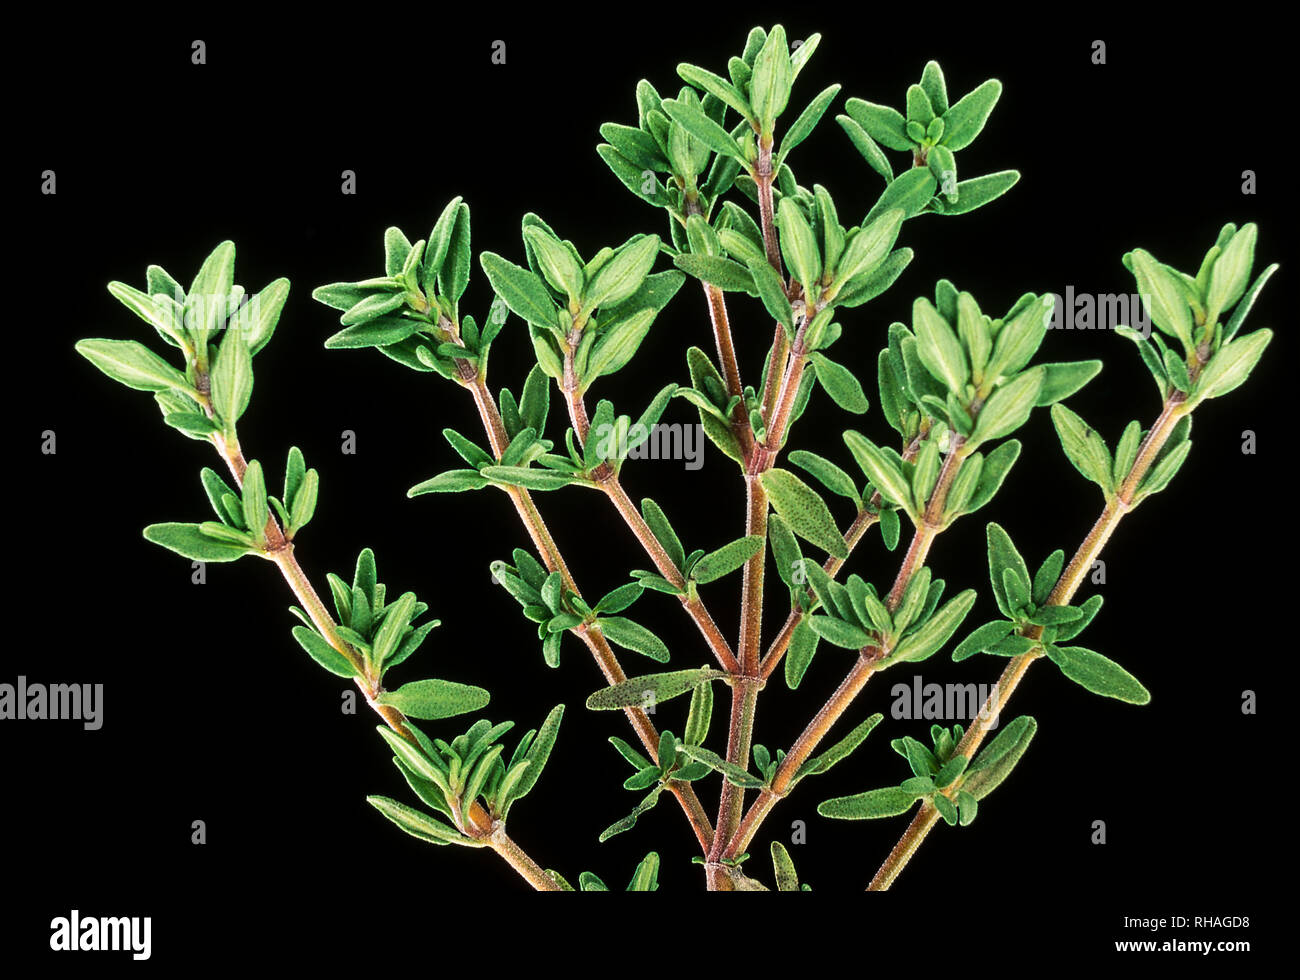 Close-up view of a sprig of the culinary herb, thyme. Stock Photo